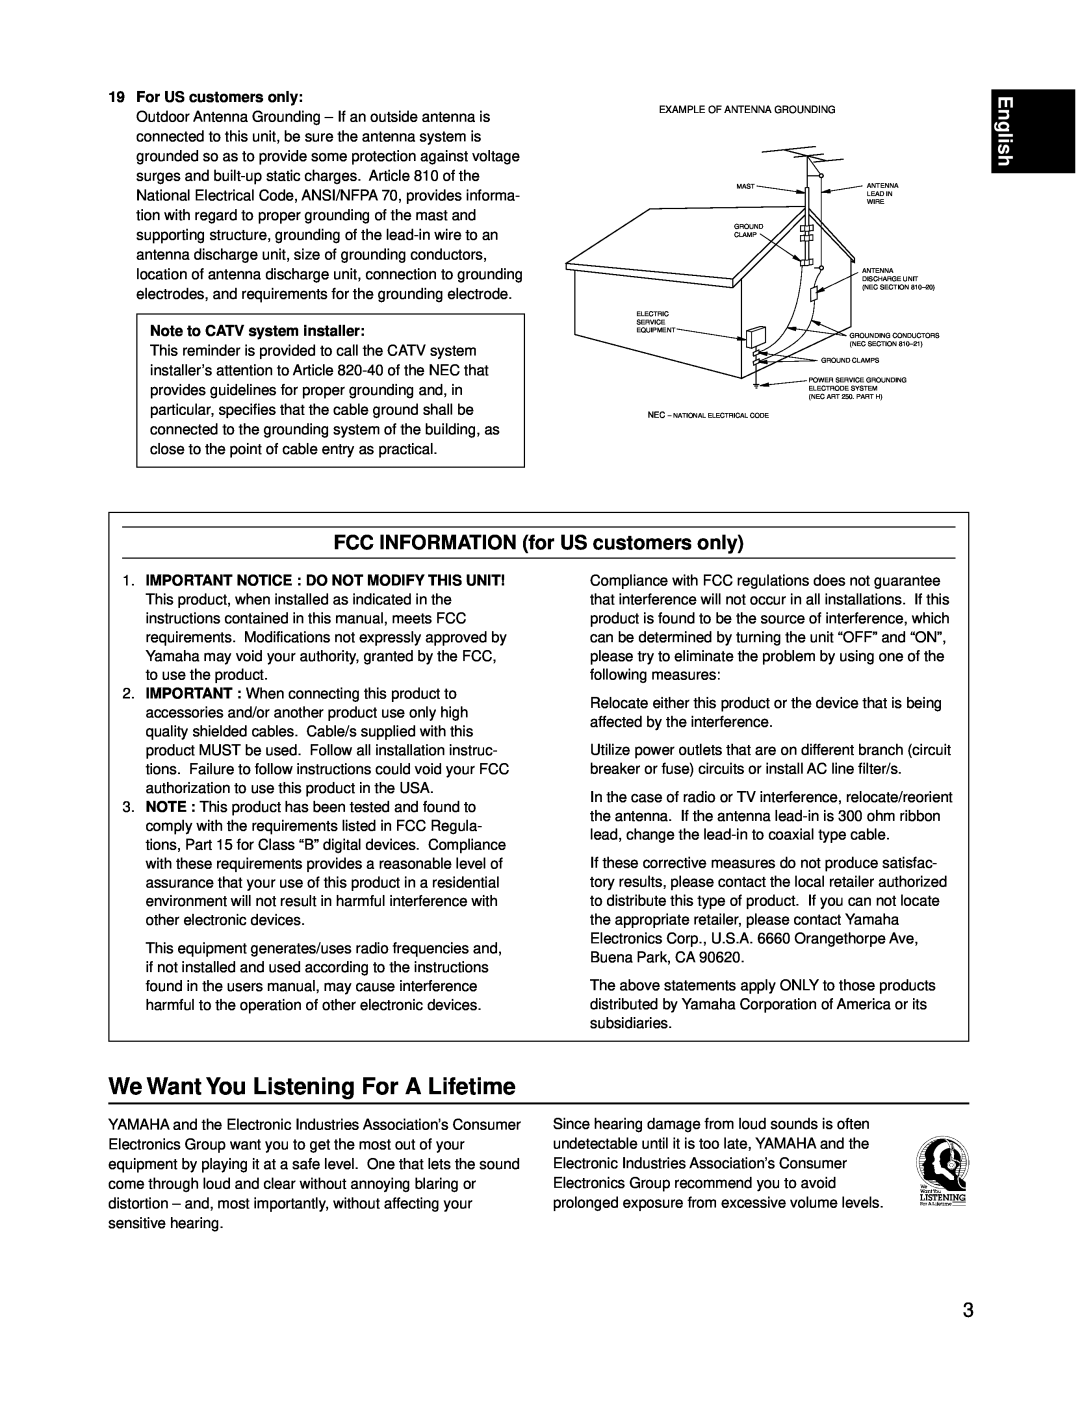 Yamaha RX-V595A owner manual We Want You Listening For A Lifetime, English, FCC INFORMATION for US customers only 